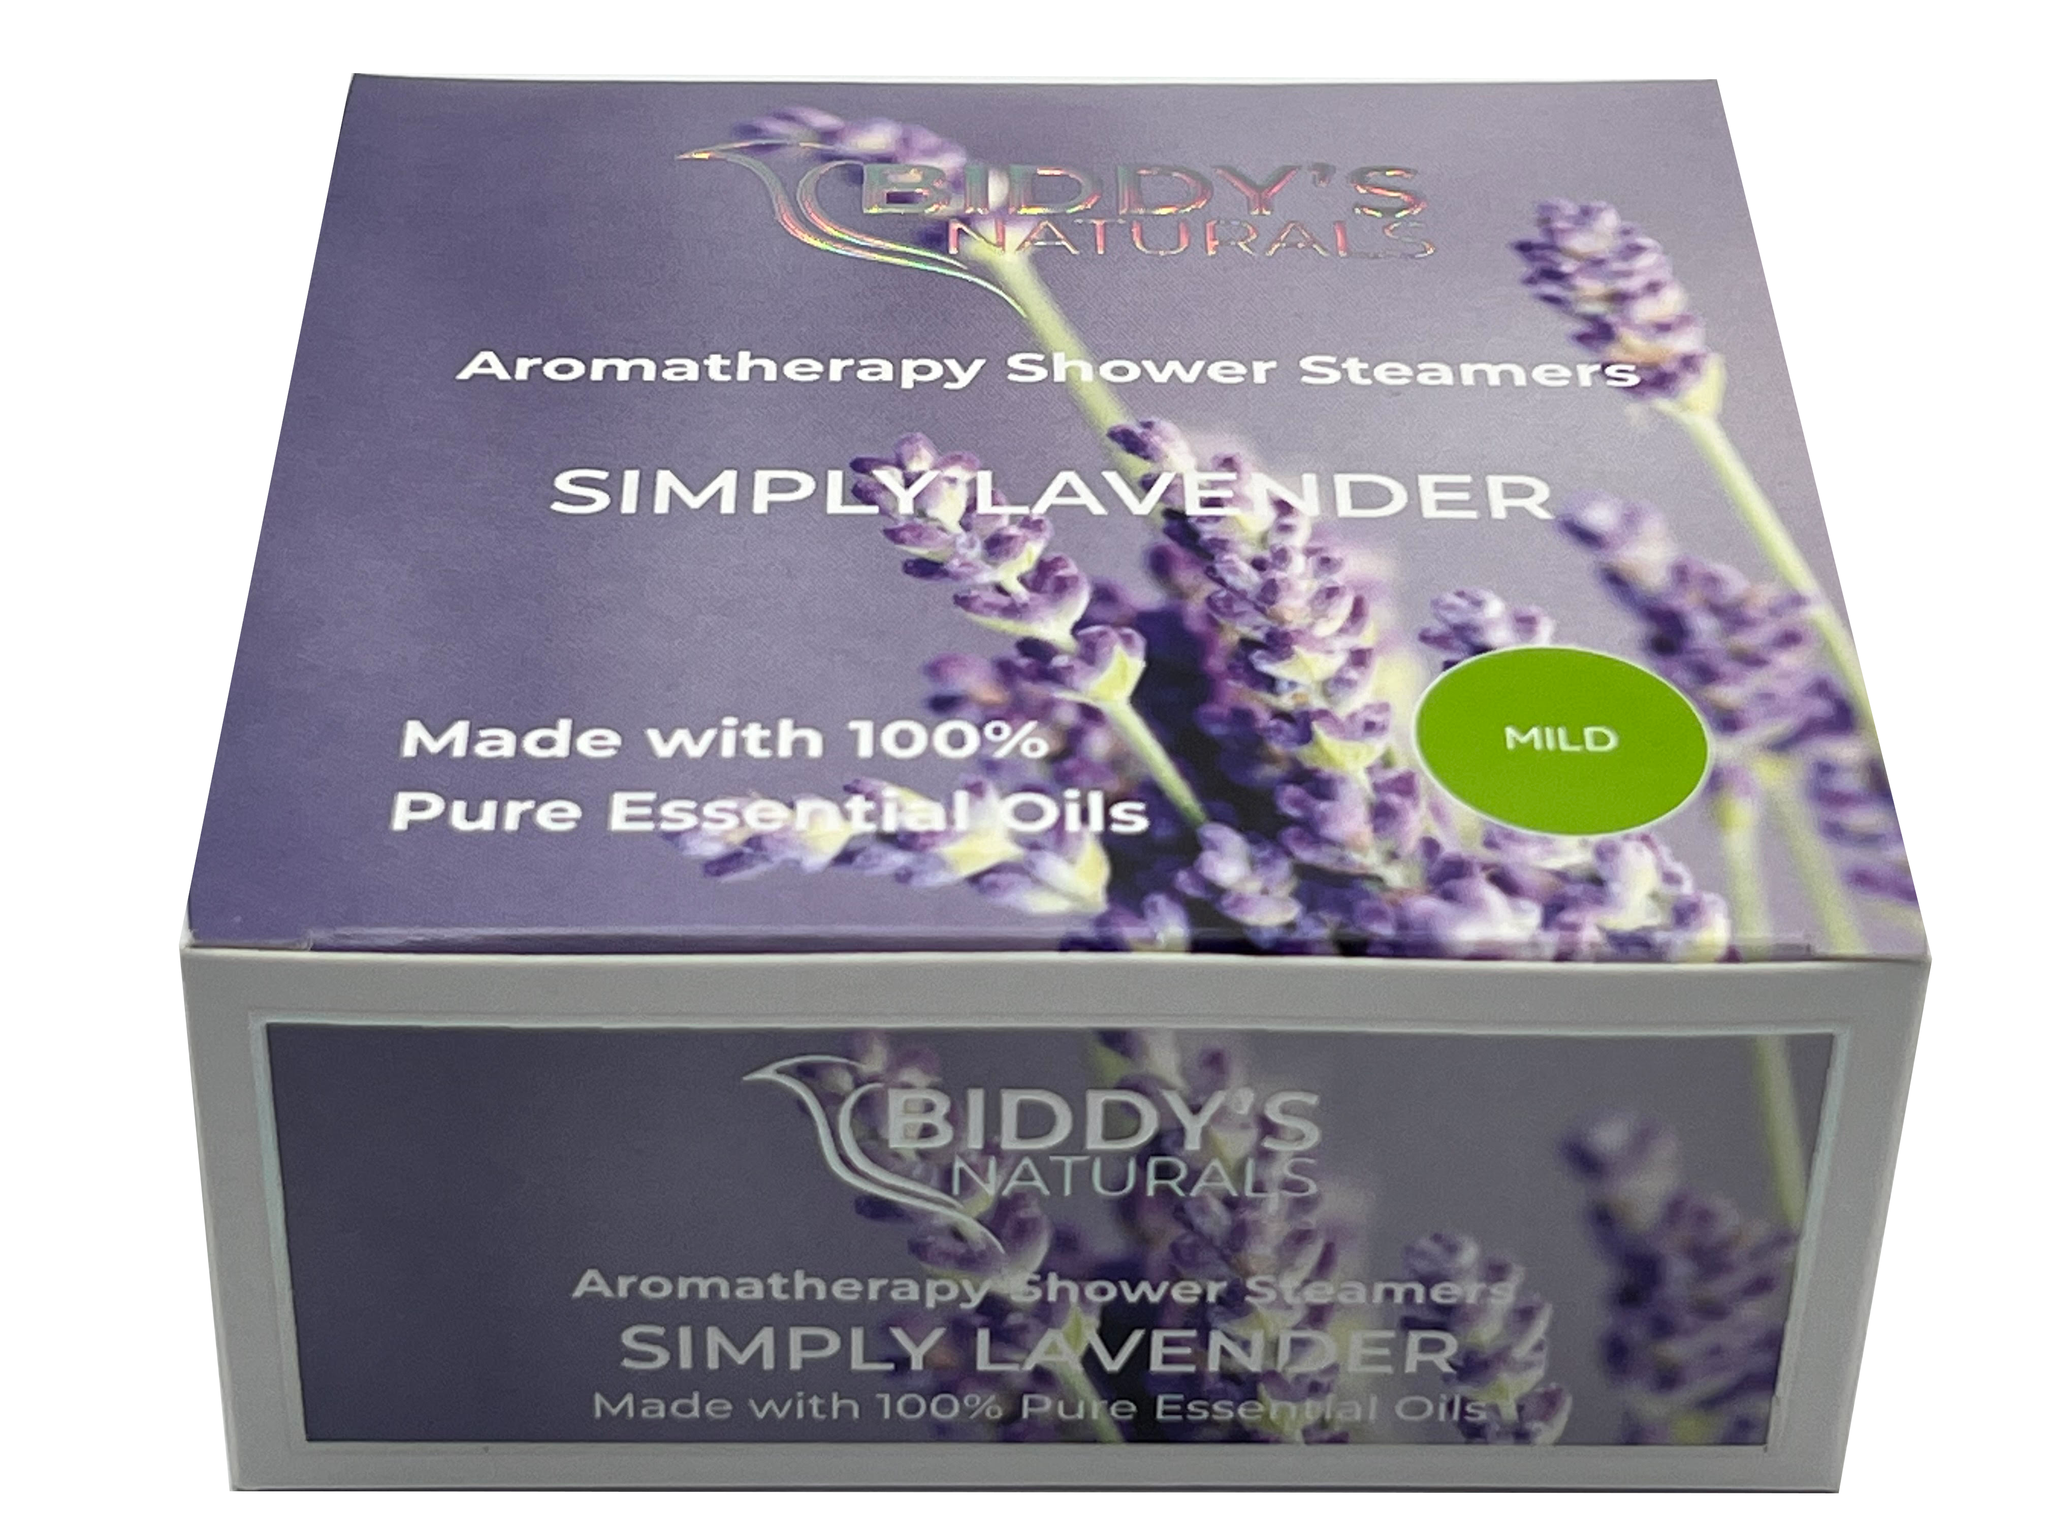 Lavender Essential Oil Reduces stress & anxiety, promotes calmness. Eases sinus pressure and promotes clear breathing